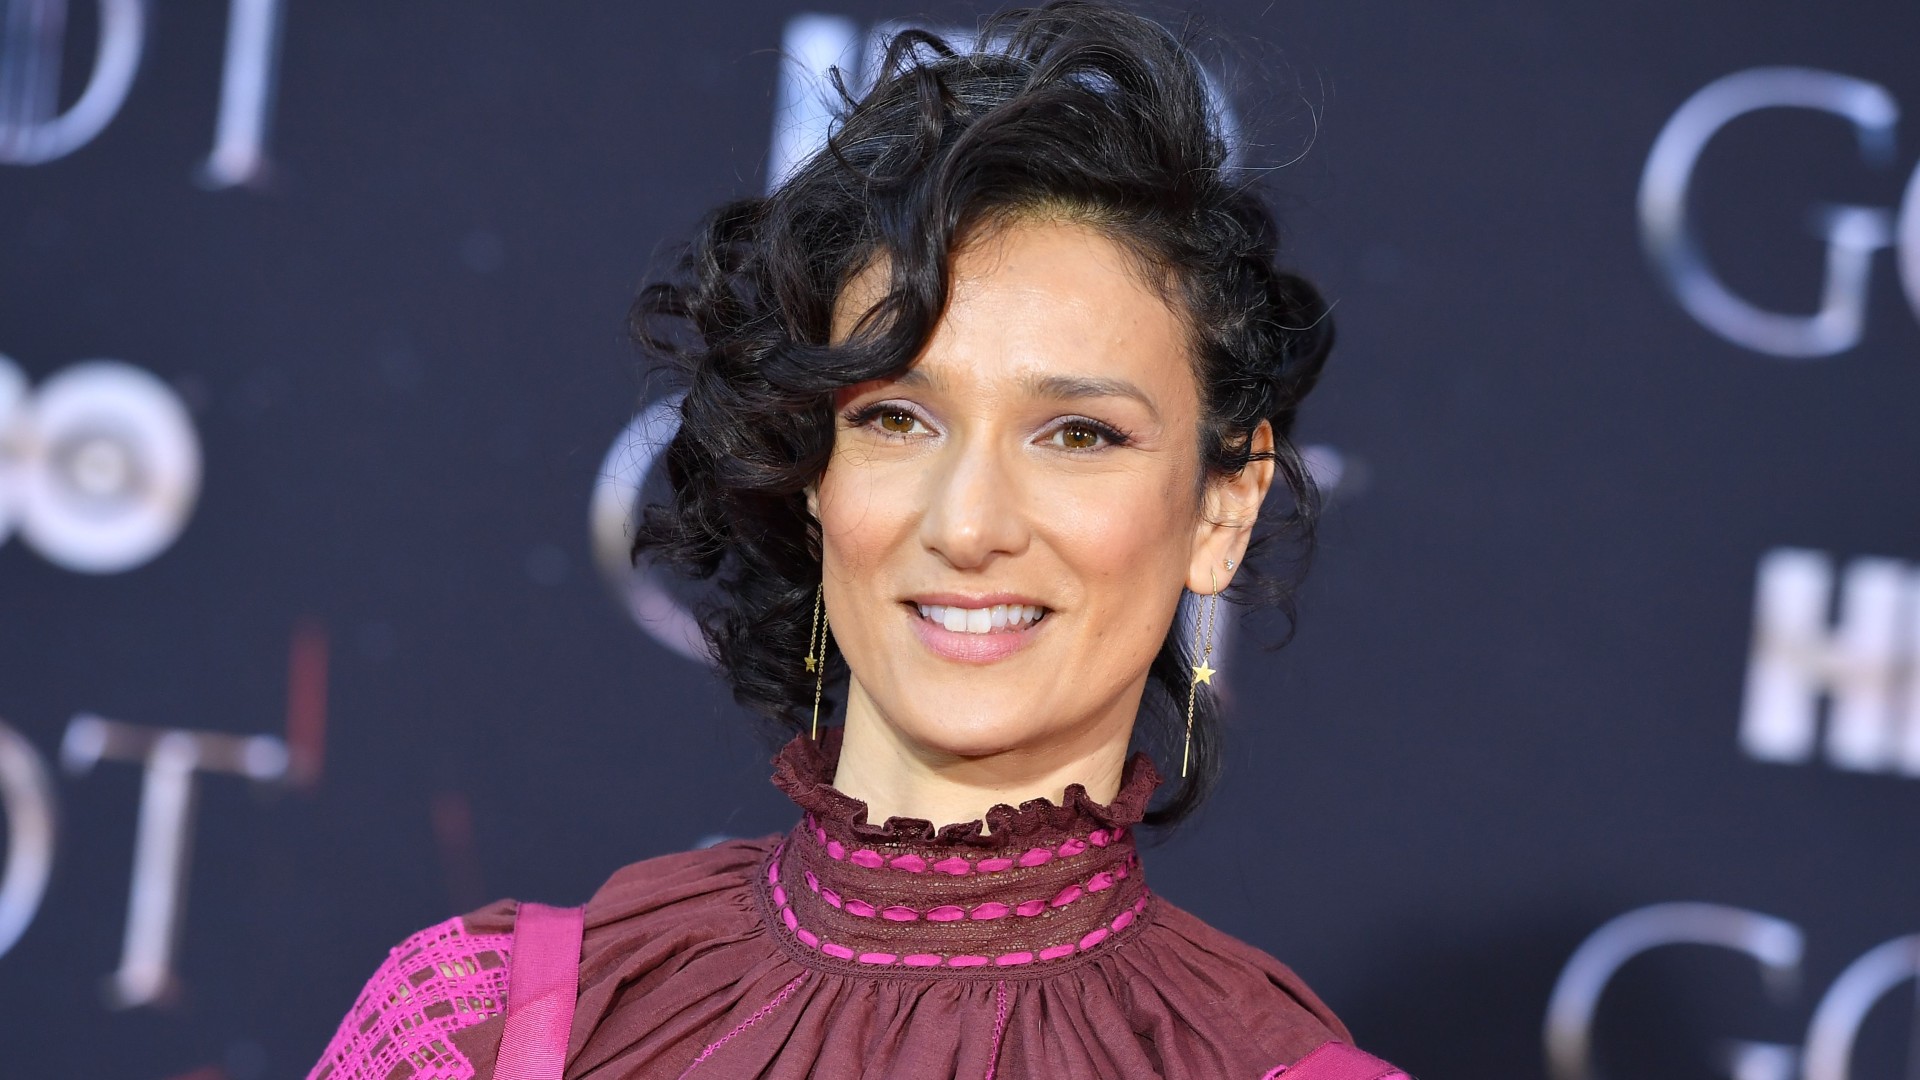 Casting News: 'Game of Thrones' and 'Torchwood' Alum Indira Varma Joins 'Star Wars' Spin-Off Series